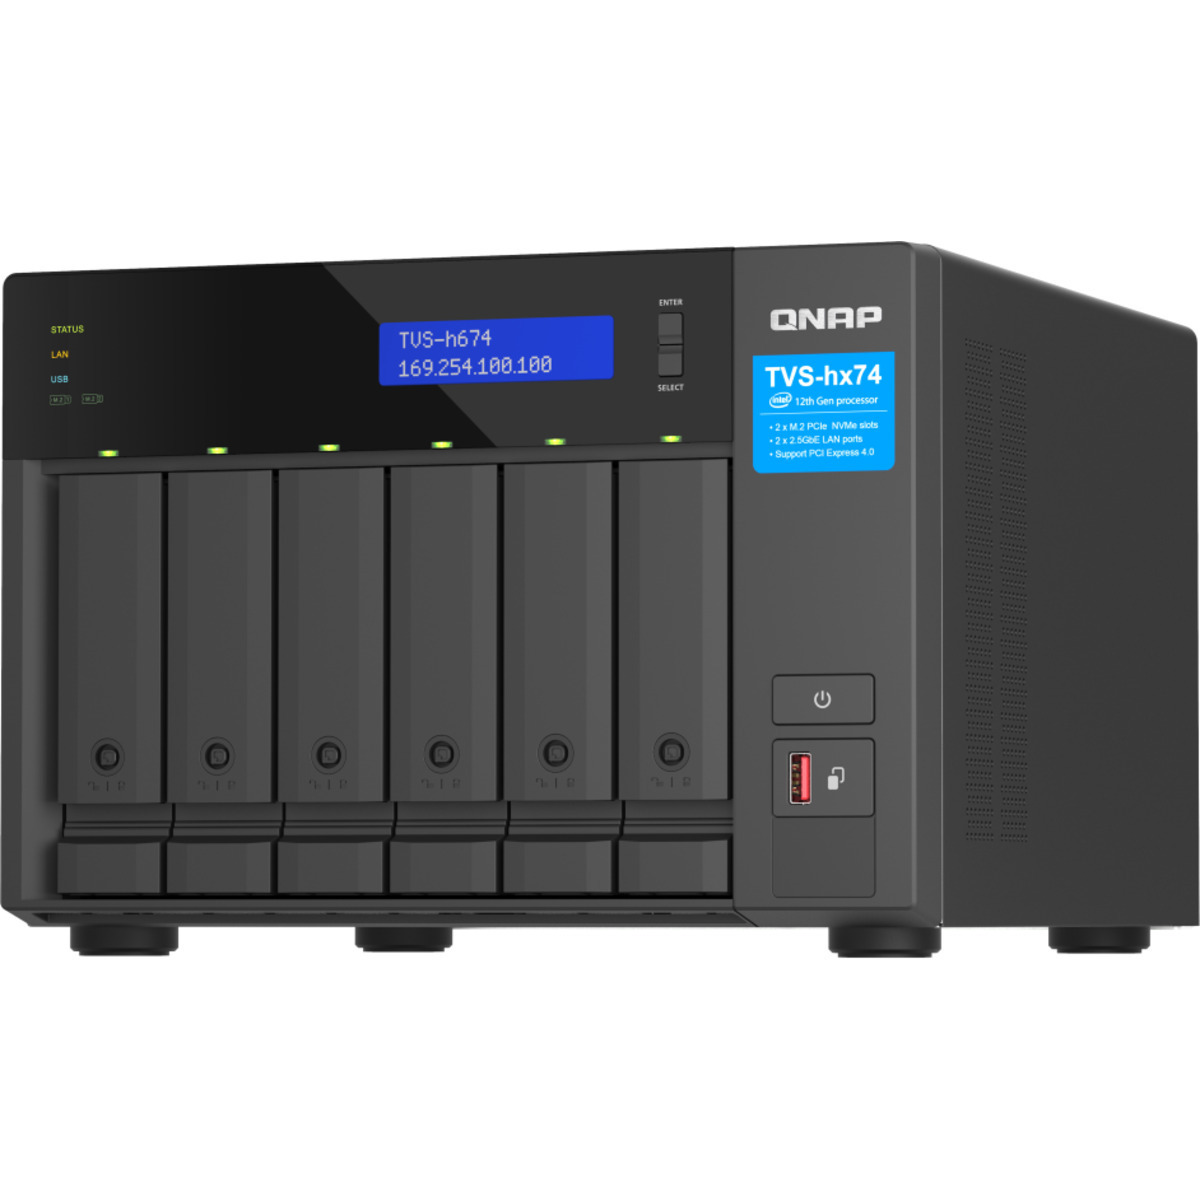 QNAP TVS-h674 Core i3 56tb 6-Bay Desktop Multimedia / Power User / Business NAS - Network Attached Storage Device 4x14tb Western Digital Gold WD142KRYZ 3.5 7200rpm SATA 6Gb/s HDD ENTERPRISE Class Drives Installed - Burn-In Tested TVS-h674 Core i3